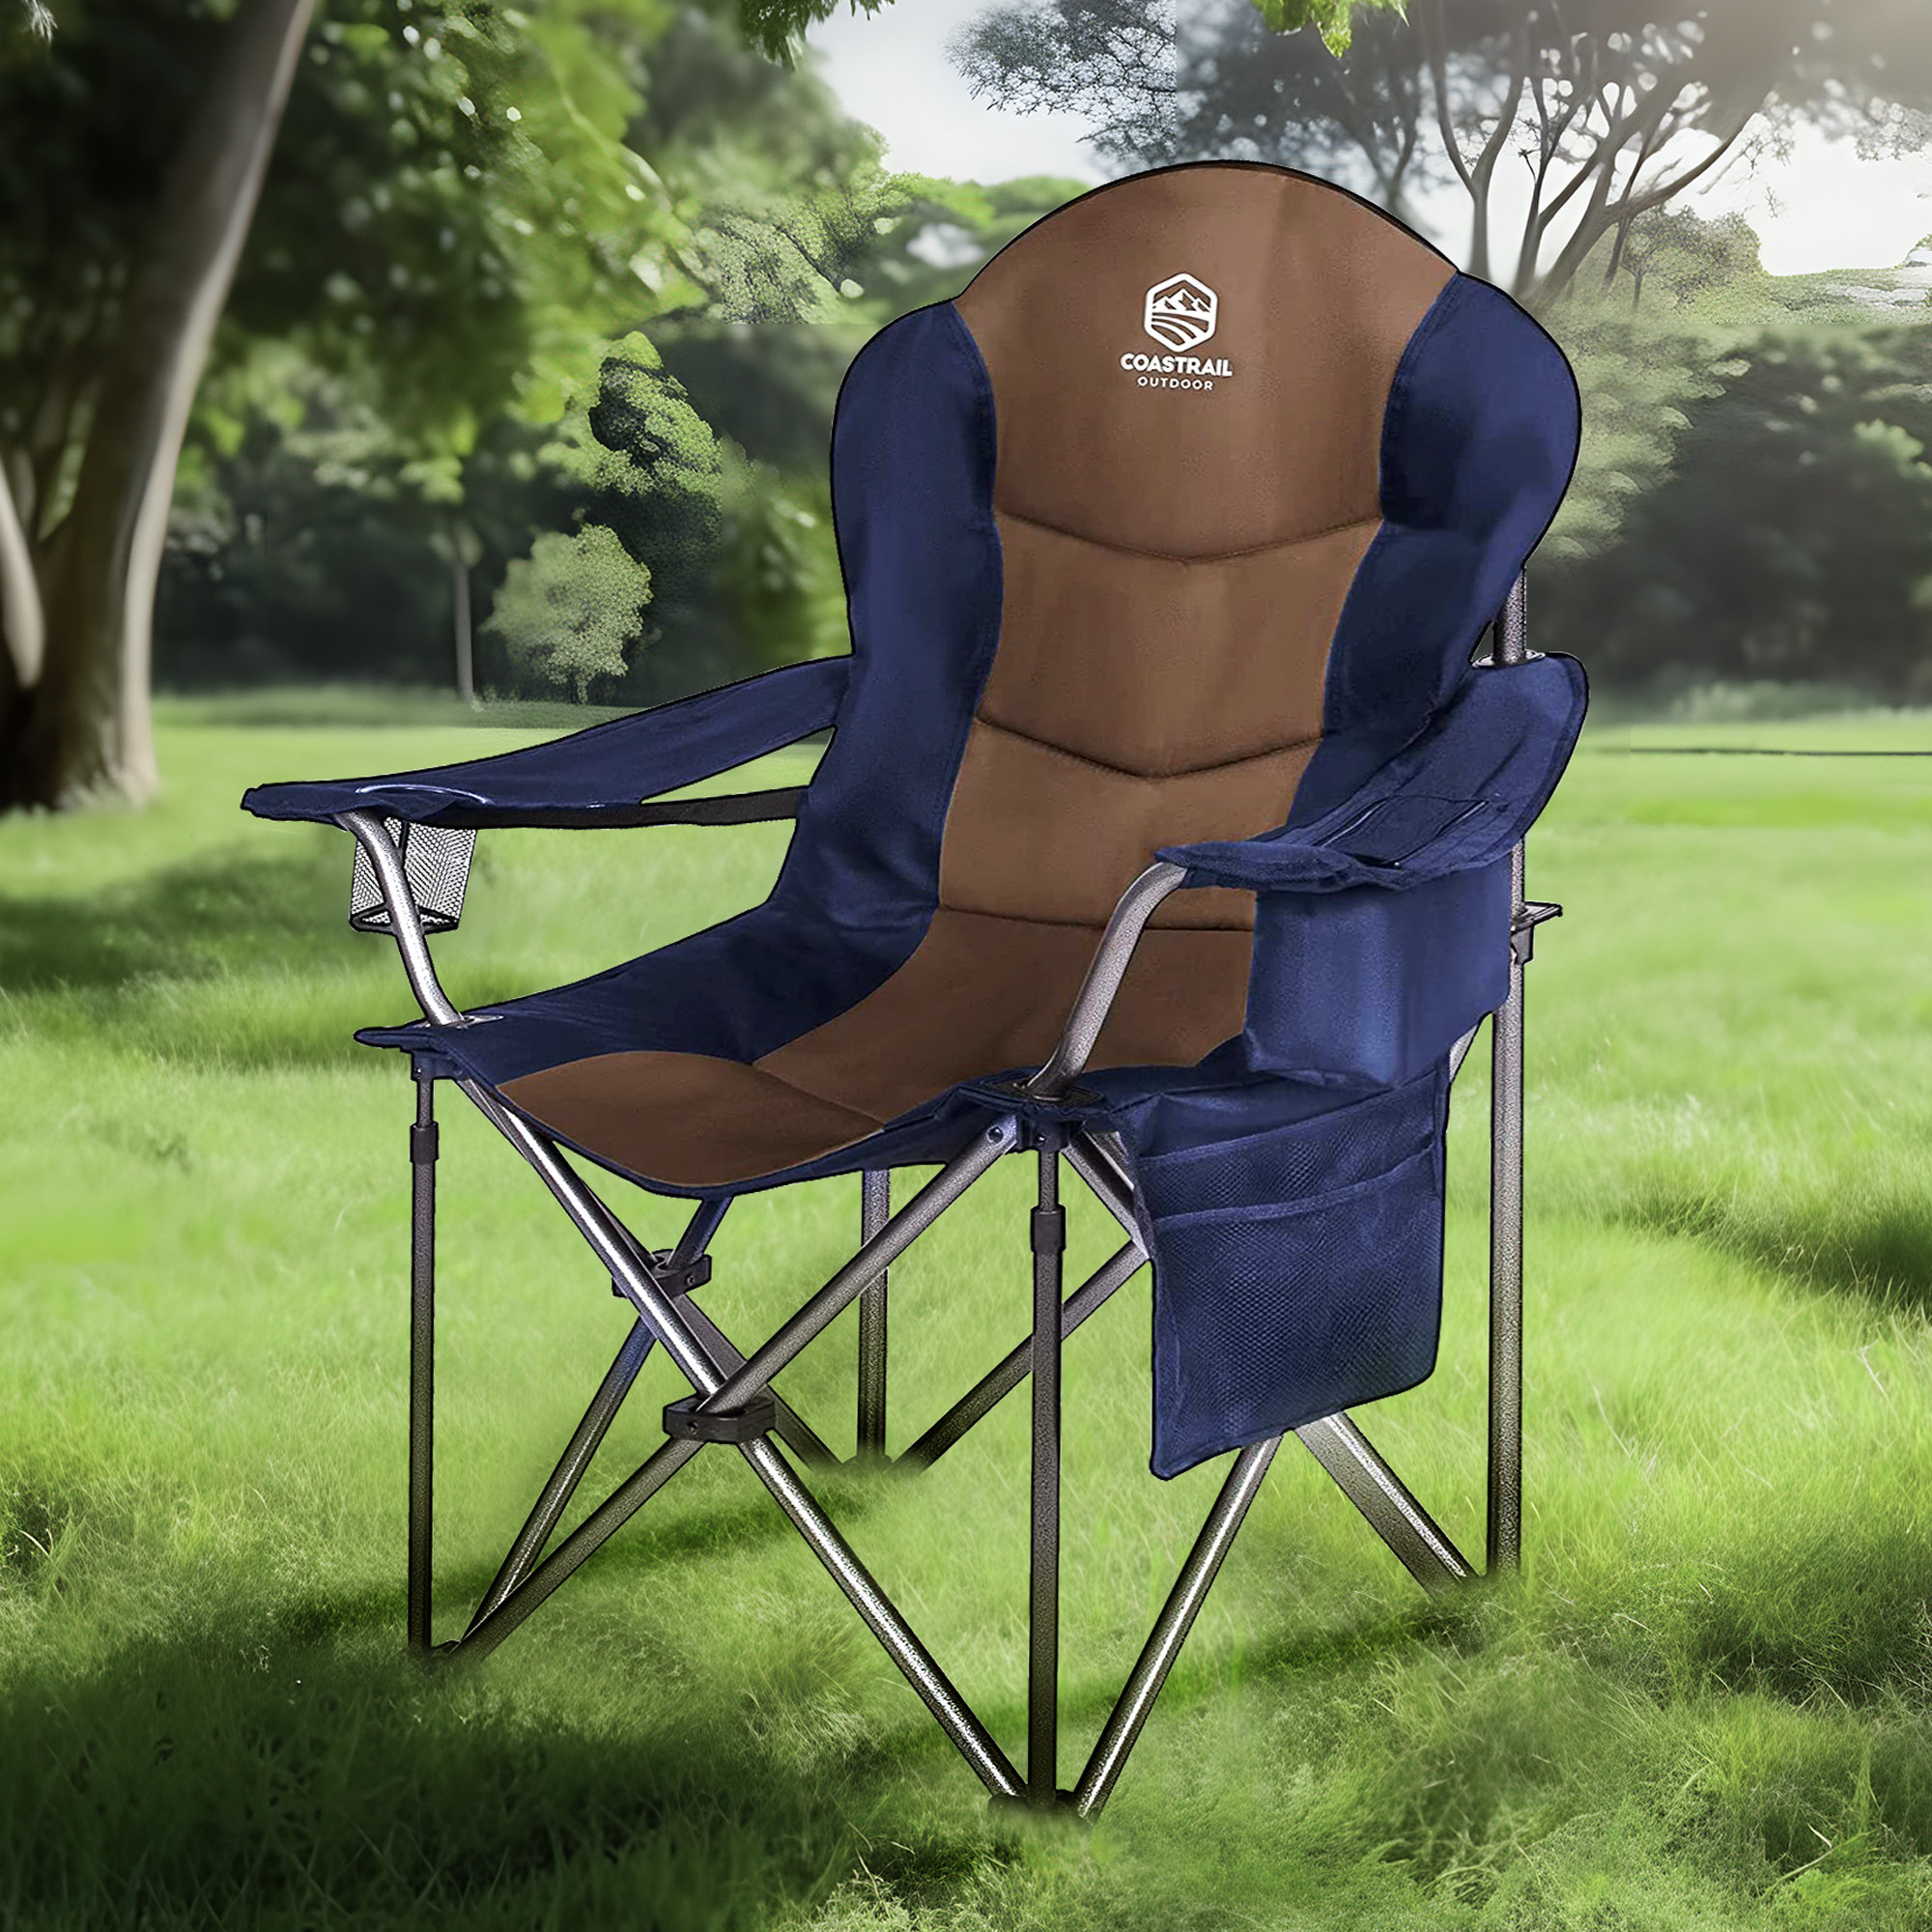 Coastrail Outdoor Outdoor Folding Camping Chair Foldable Lawn Beach Chair  Portable Chair with Cup Holder for Picnic Wayfair